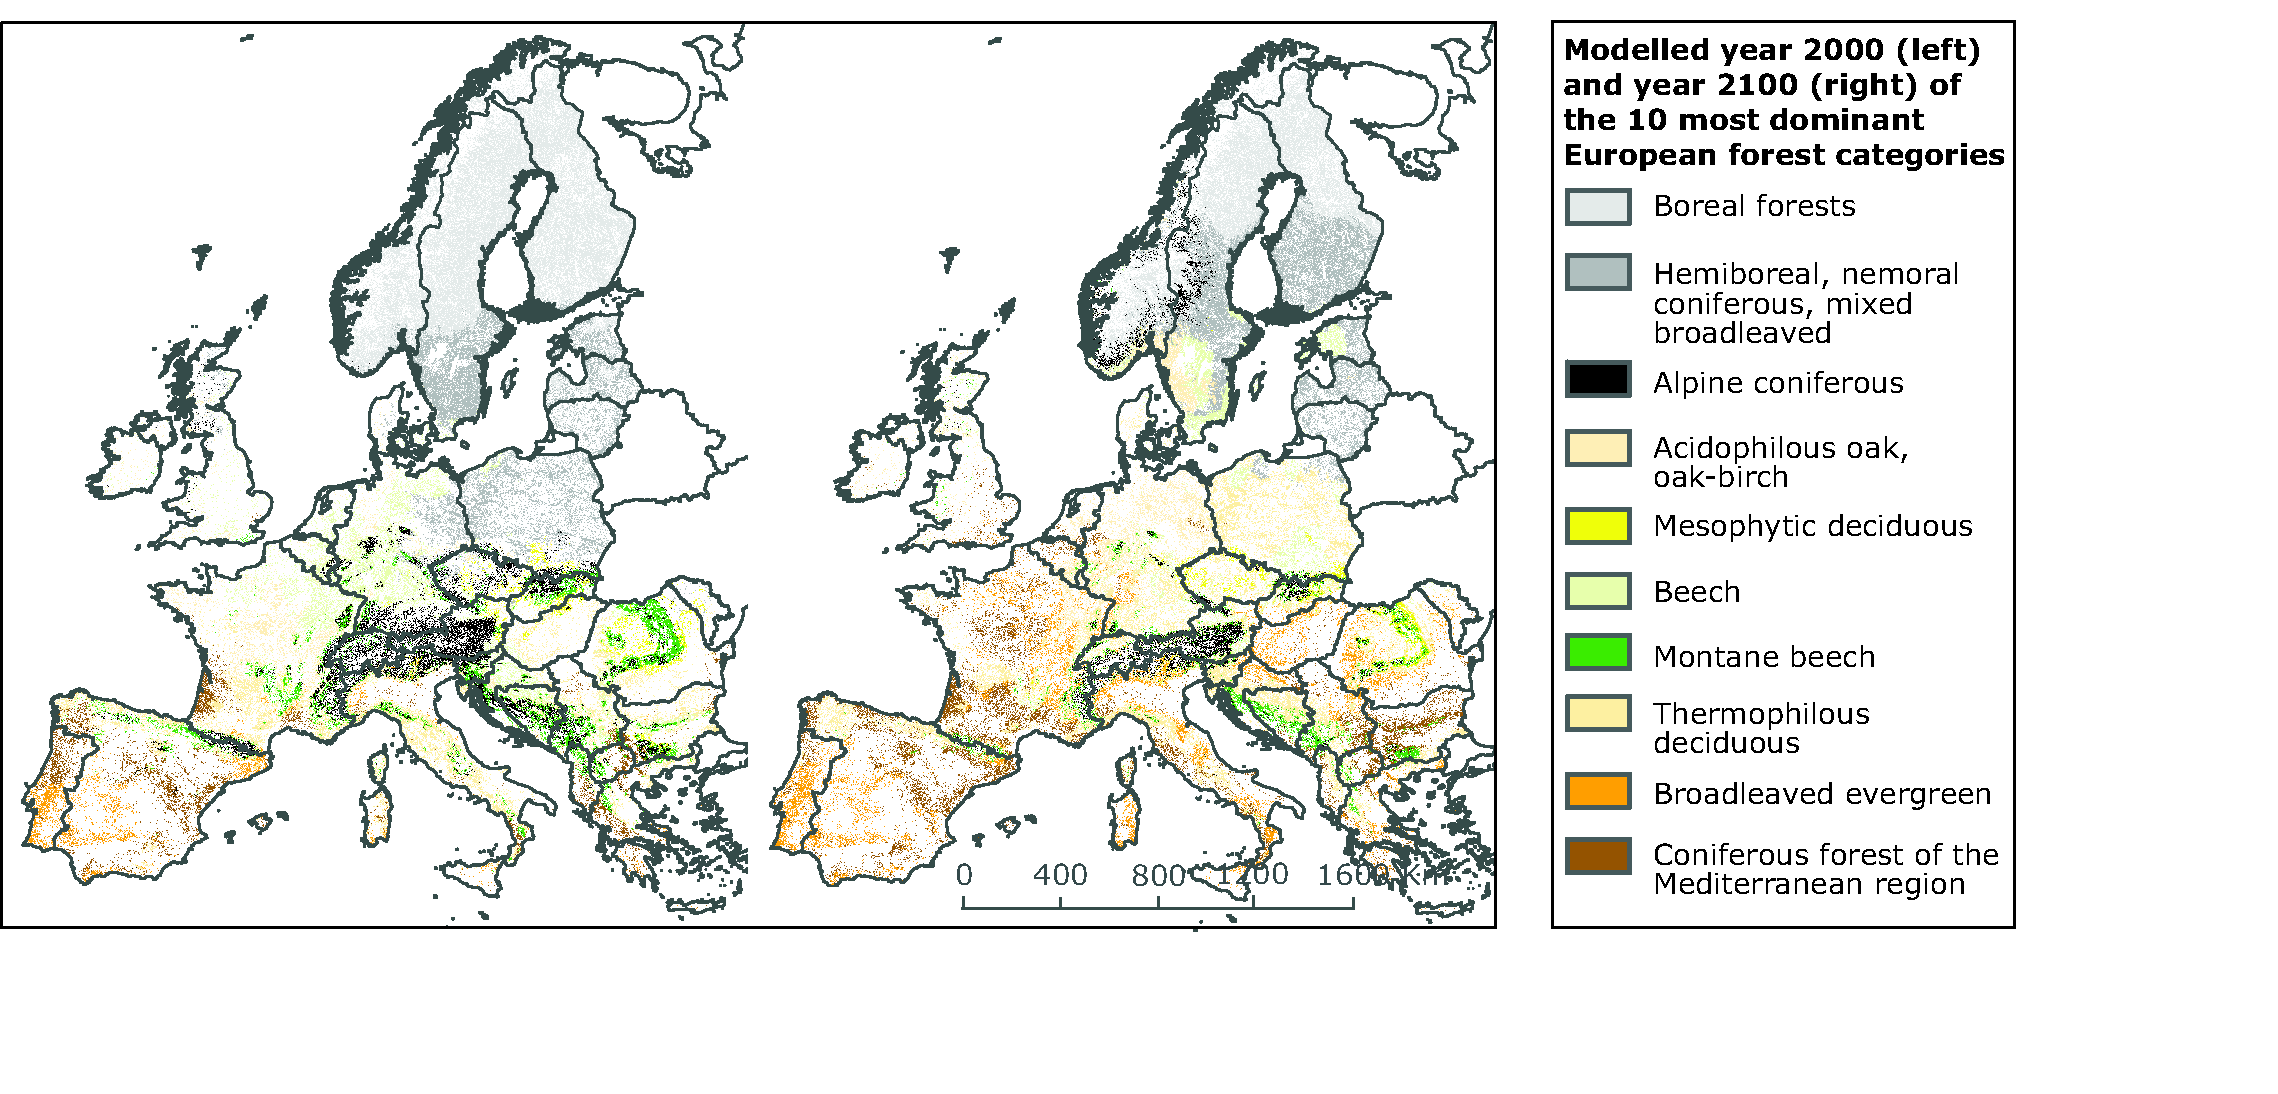 Current (2000) and projected (2100) forest coverage in Europe